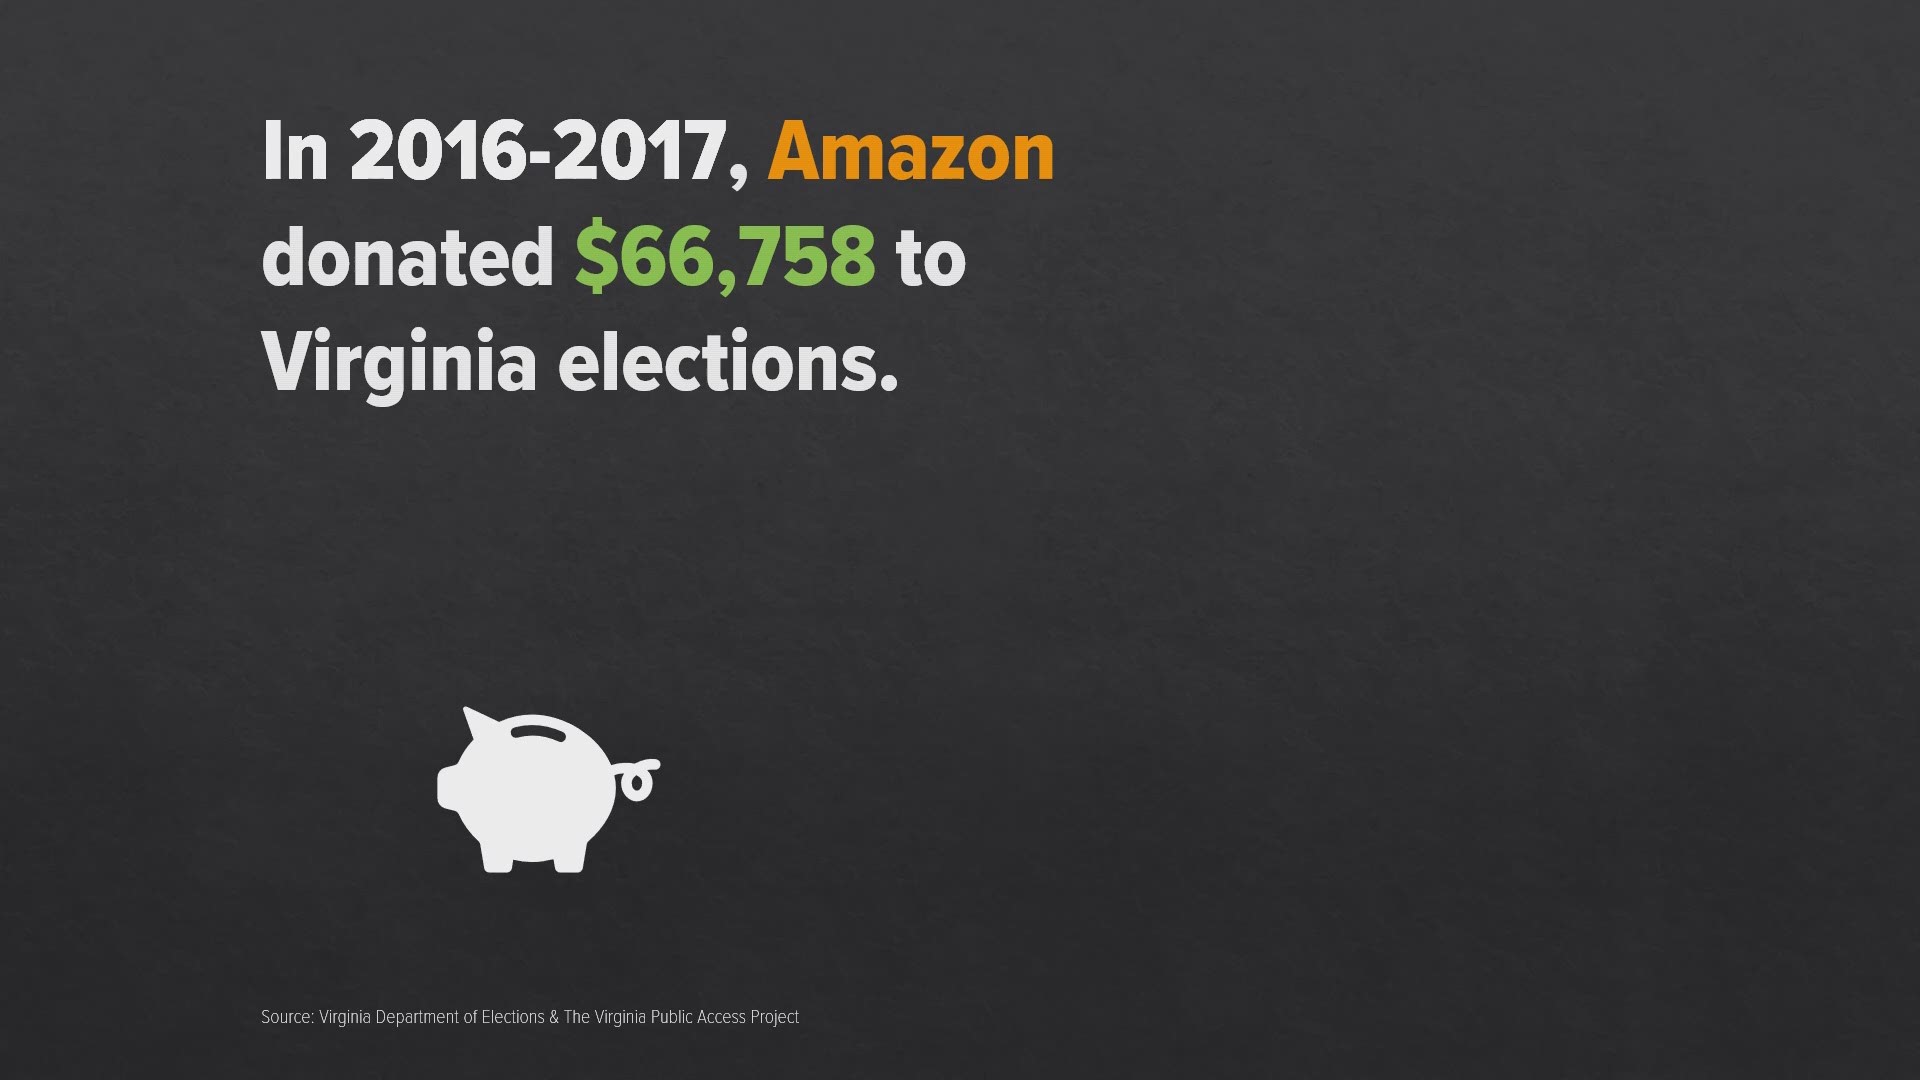 A year after announcing it would be the new home of HQ2, Amazon has quadrupled its election spending in Virginia.